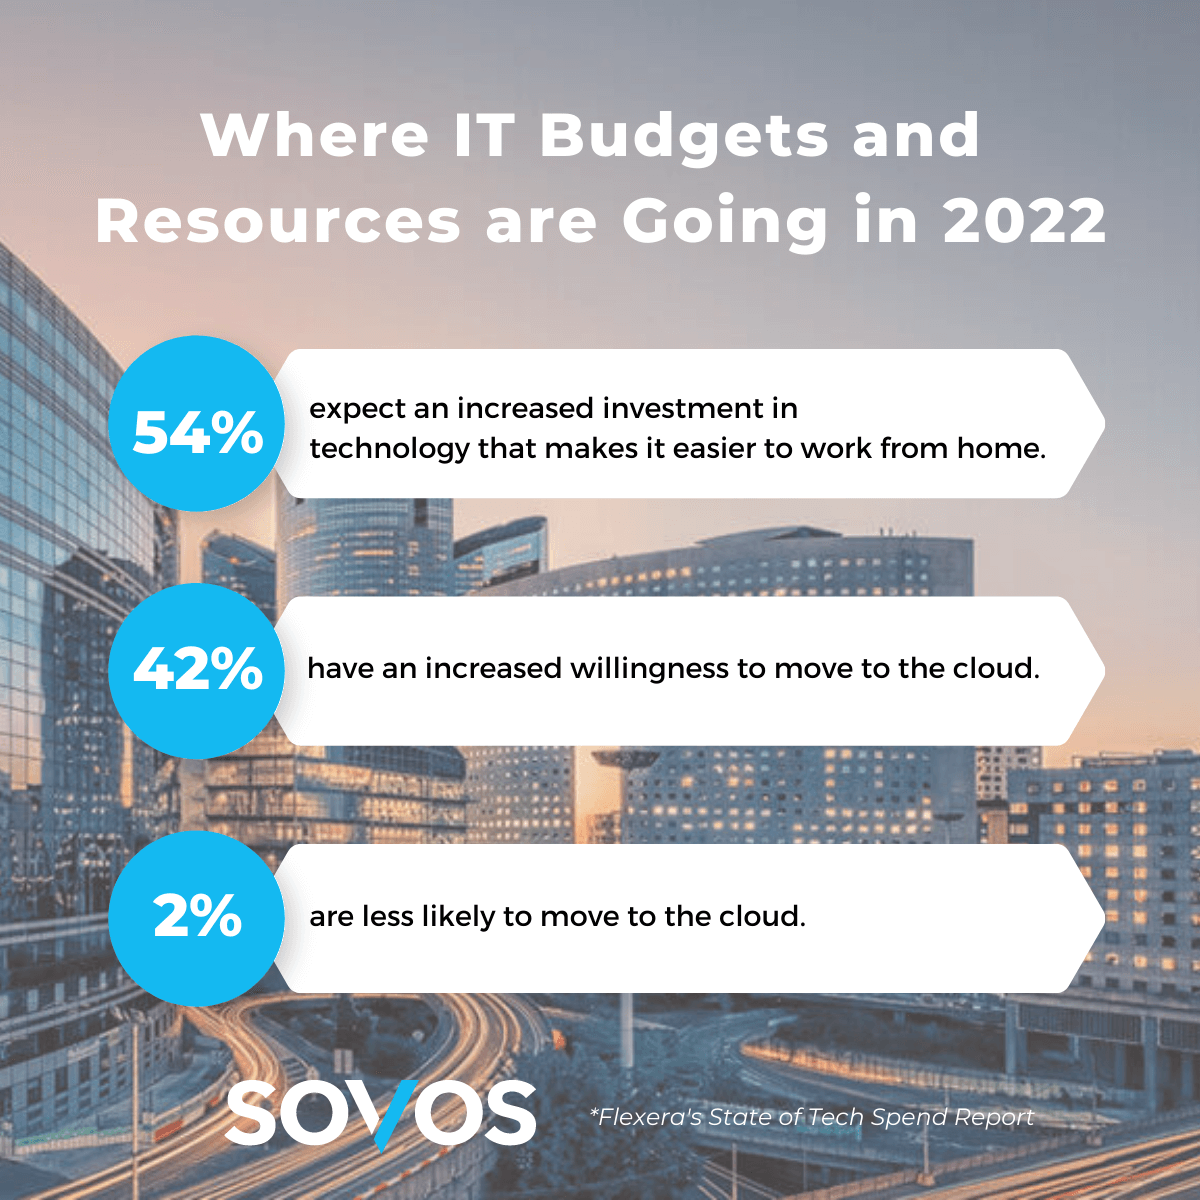 Where IT budgets are going in 2022